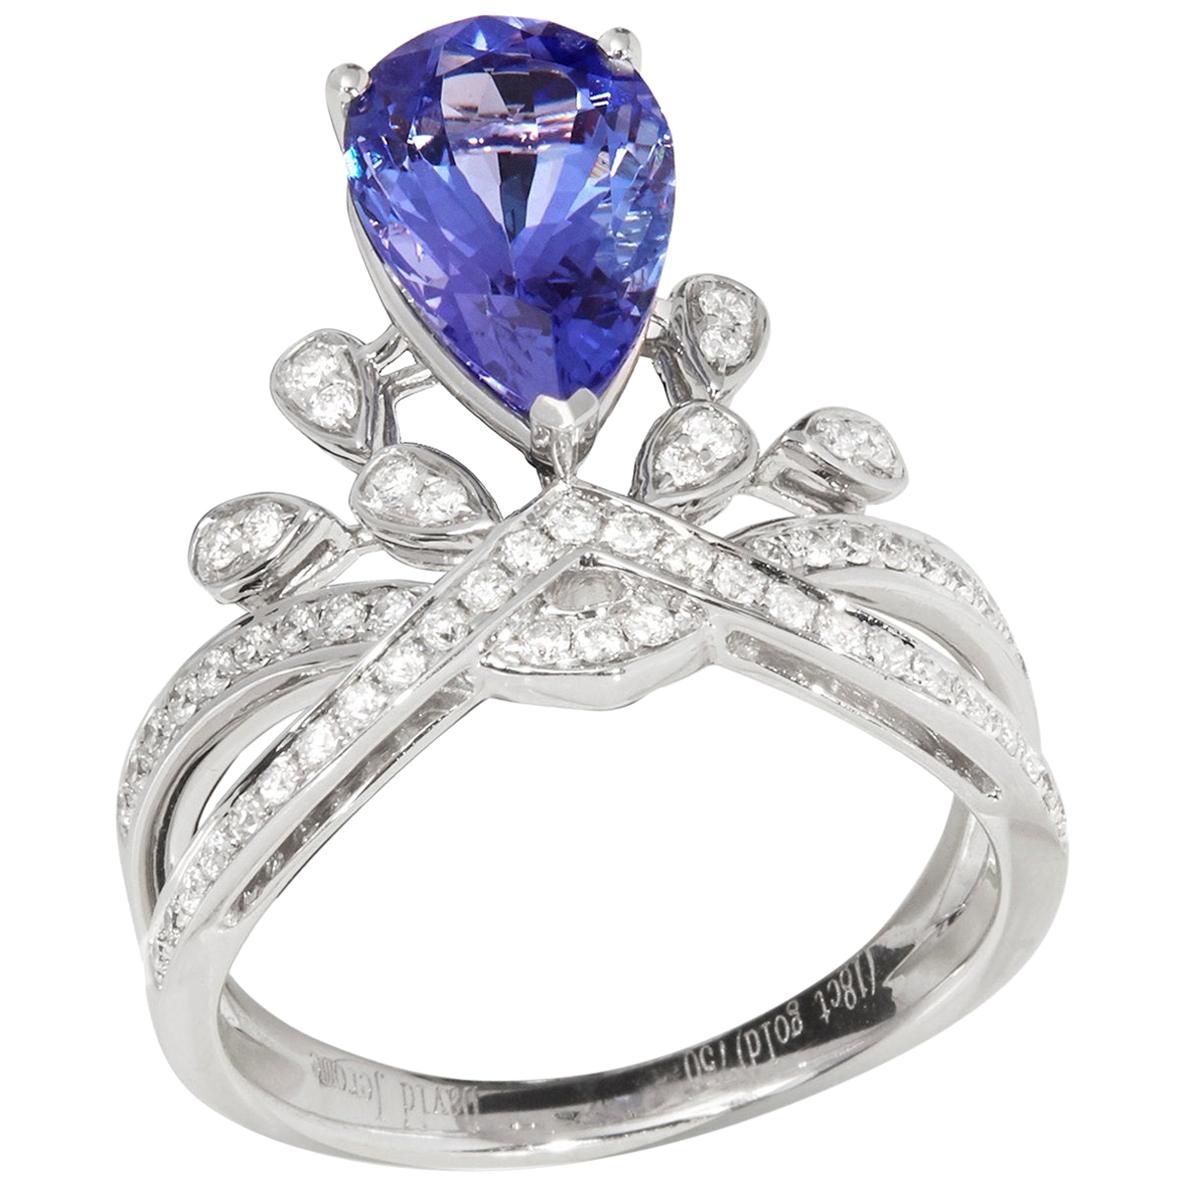 Certified 2.7ct Pear Cut Tanzanite and Diamond 18ct gold Ring